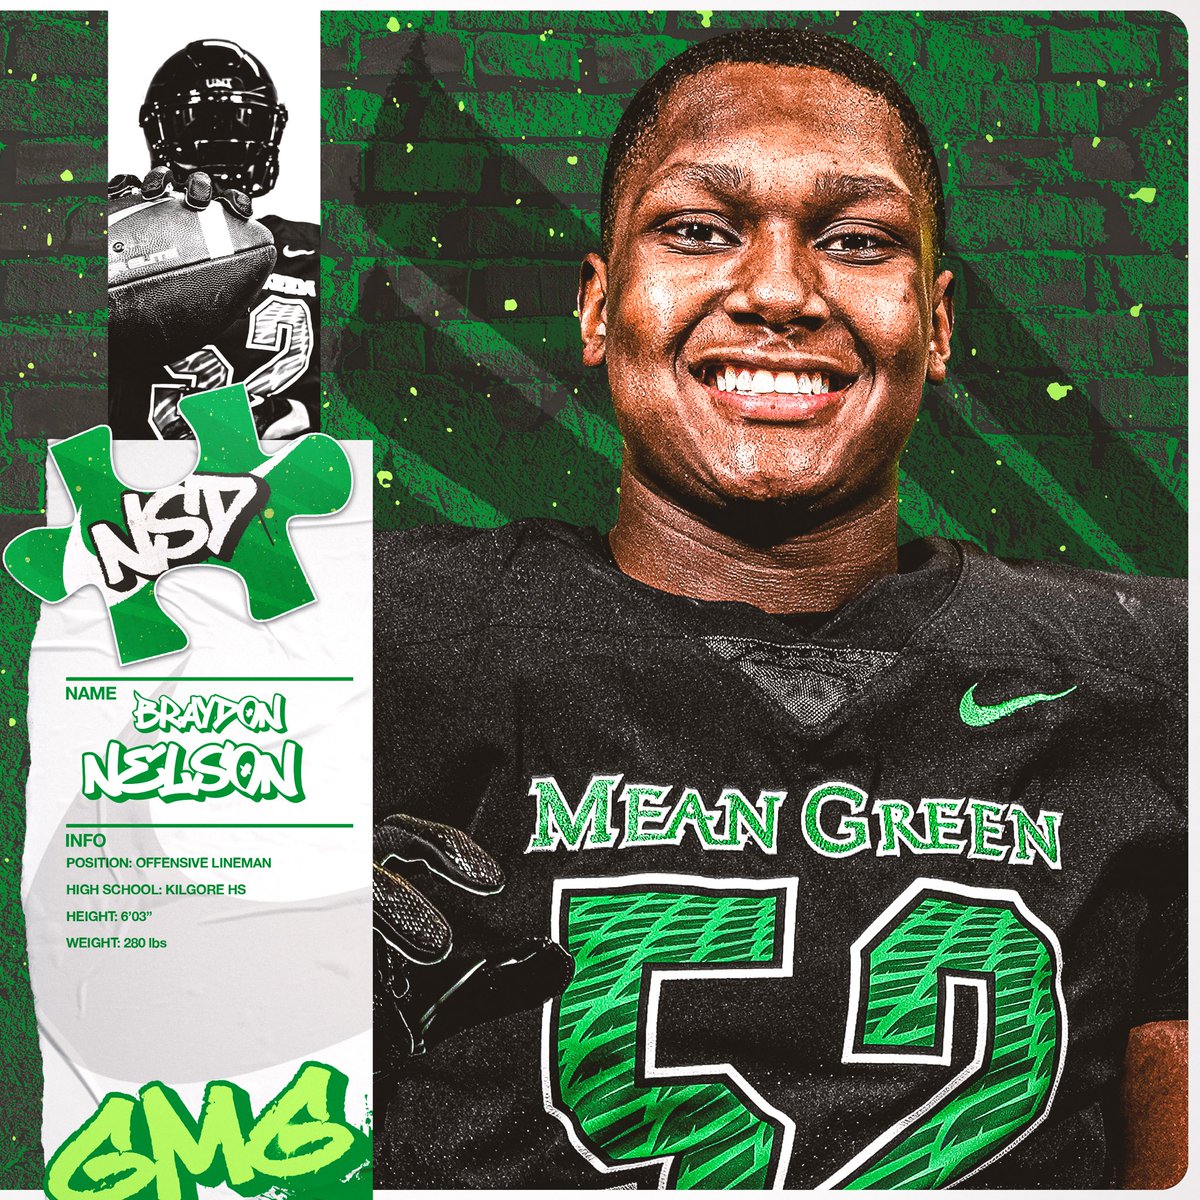 Piece by piece 🧩 Welcome to the Mean Green @BraydonNelson1 #GMG🦅